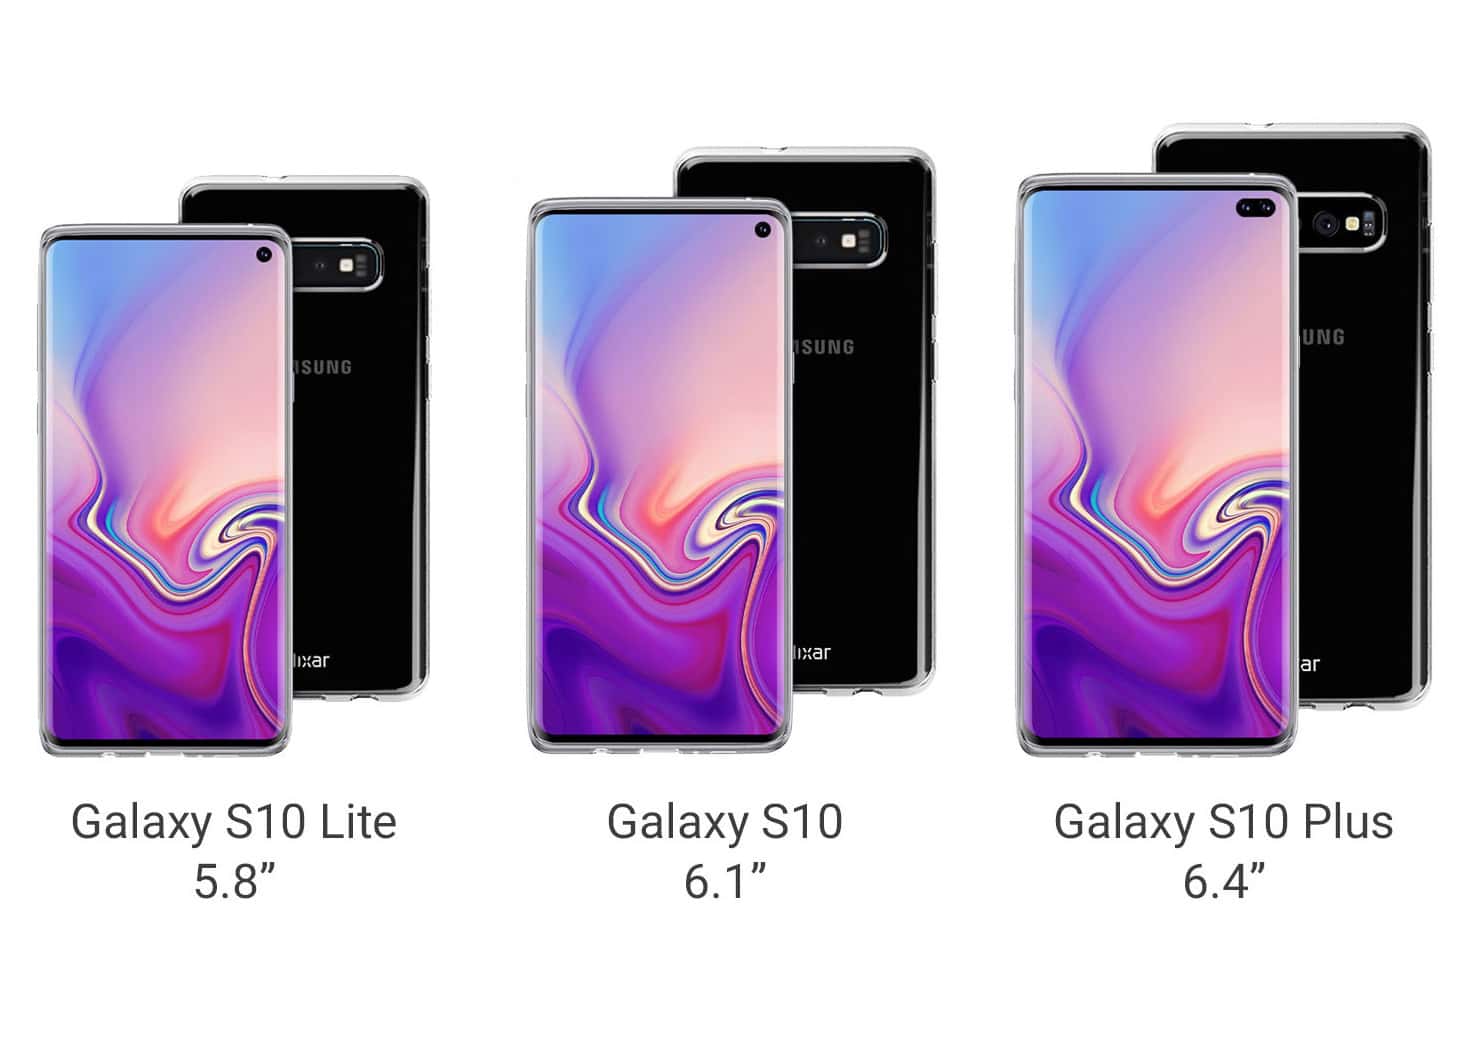 English online store declassified the entire line of the Galaxy S10